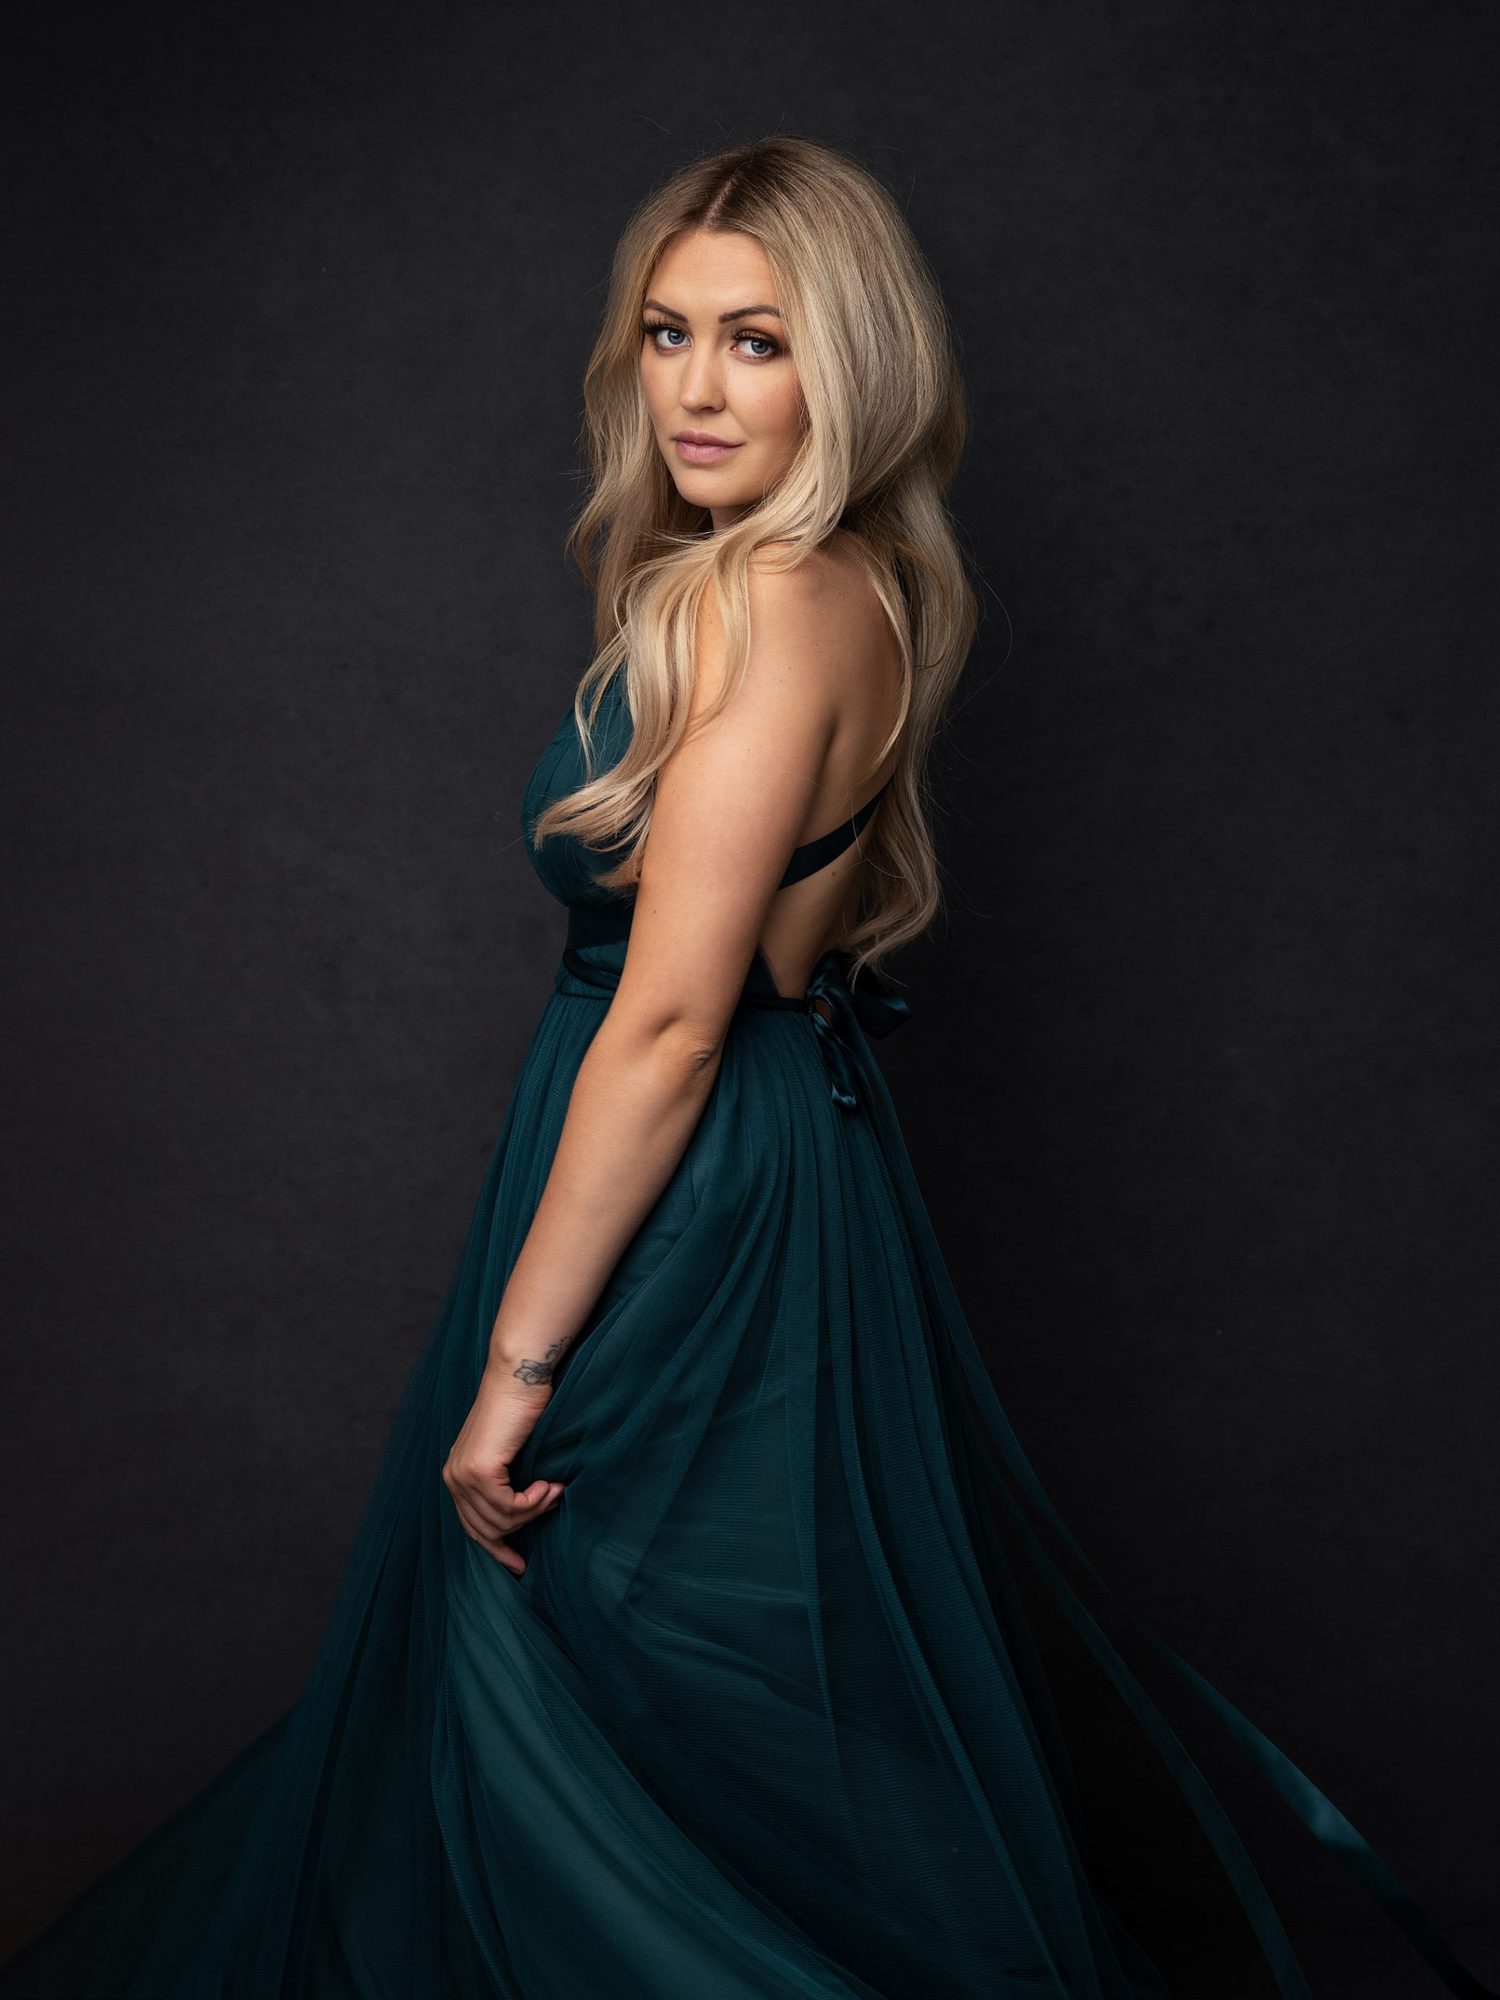 Blonde woman looks over her shoulder during her Beauty Photo shoot while wearing a green dress